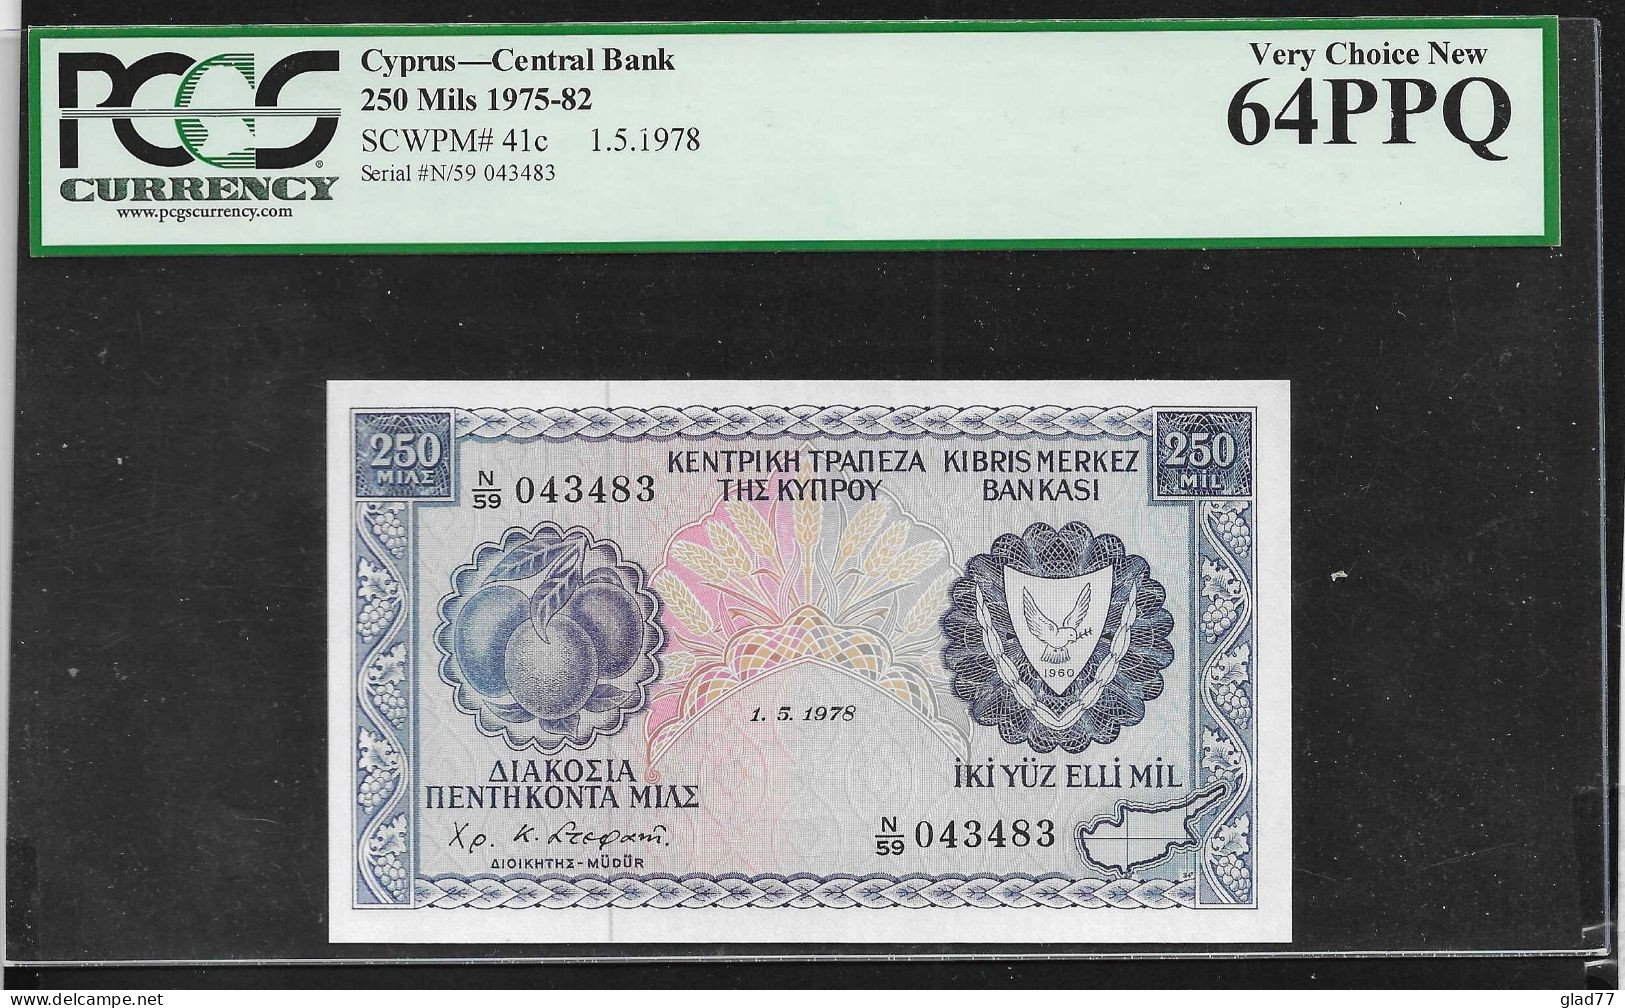 Cyprus  250 MIL 1.5.1978 PCGS Banknote 64 PPQ (Perfect Paper Quality) Very Choice UNC! Rare!! - Zypern